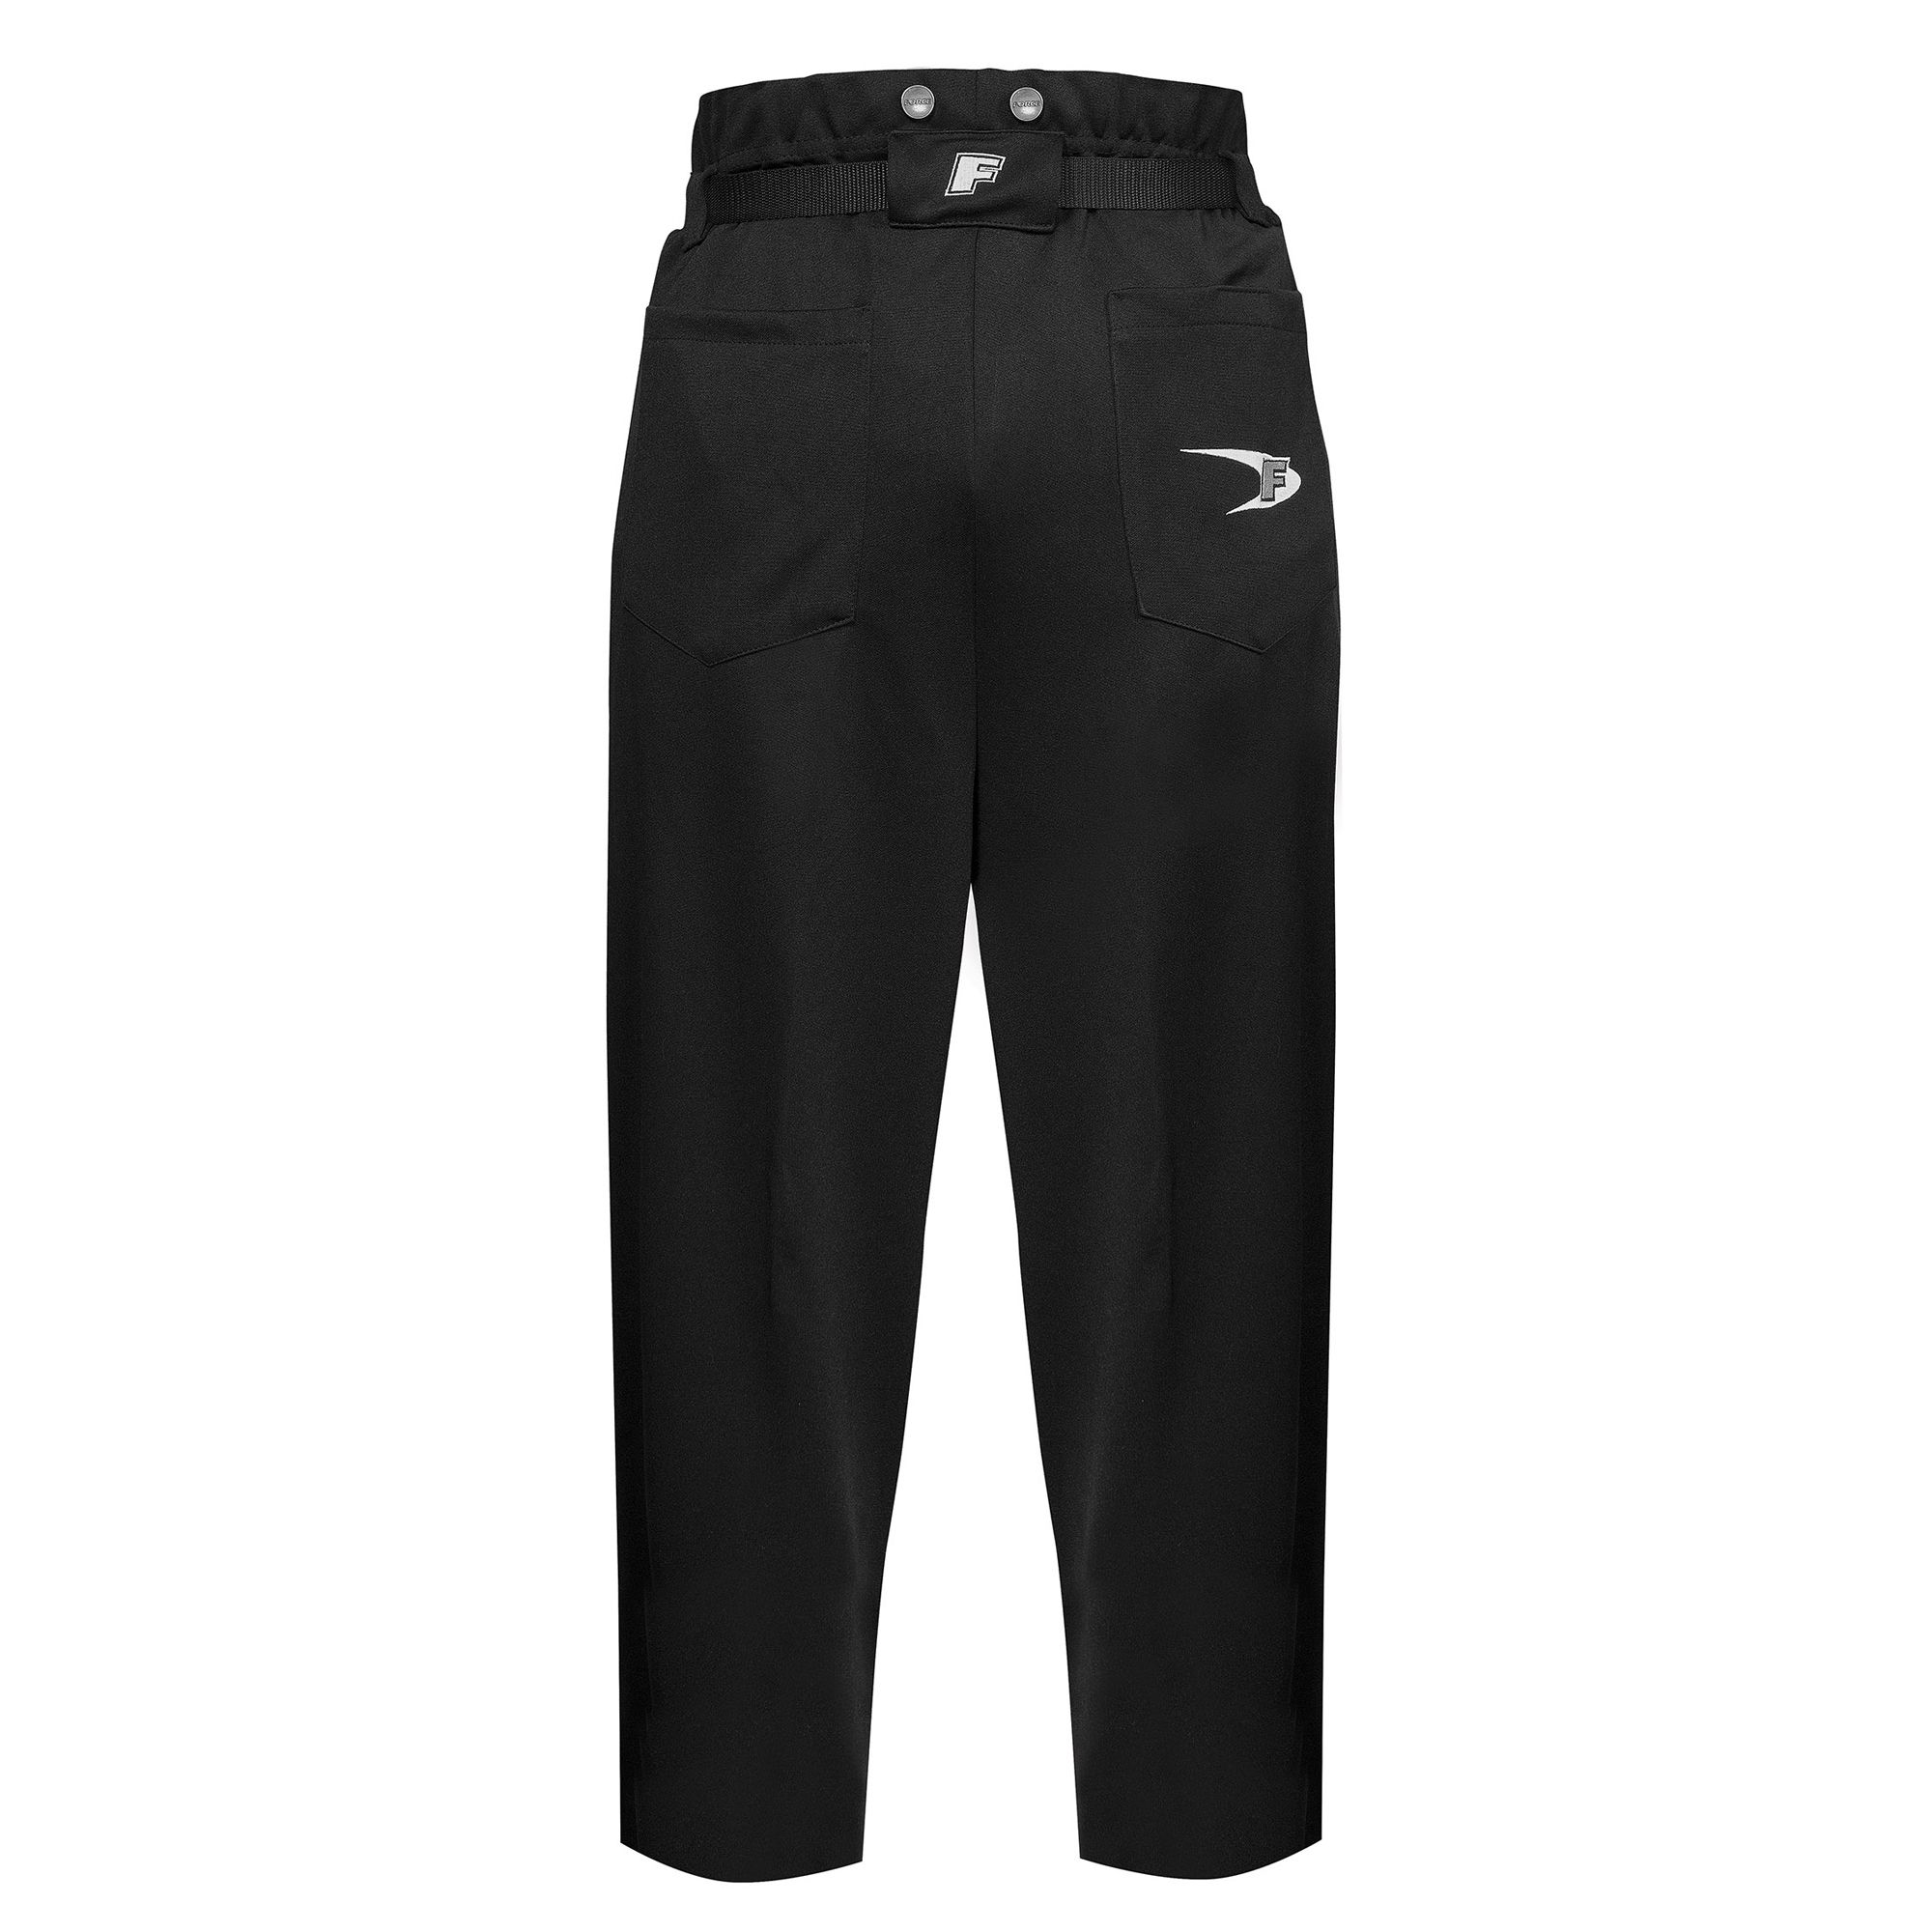 Smitty Apparel Basketball Referee Officiating Pants #bks-267